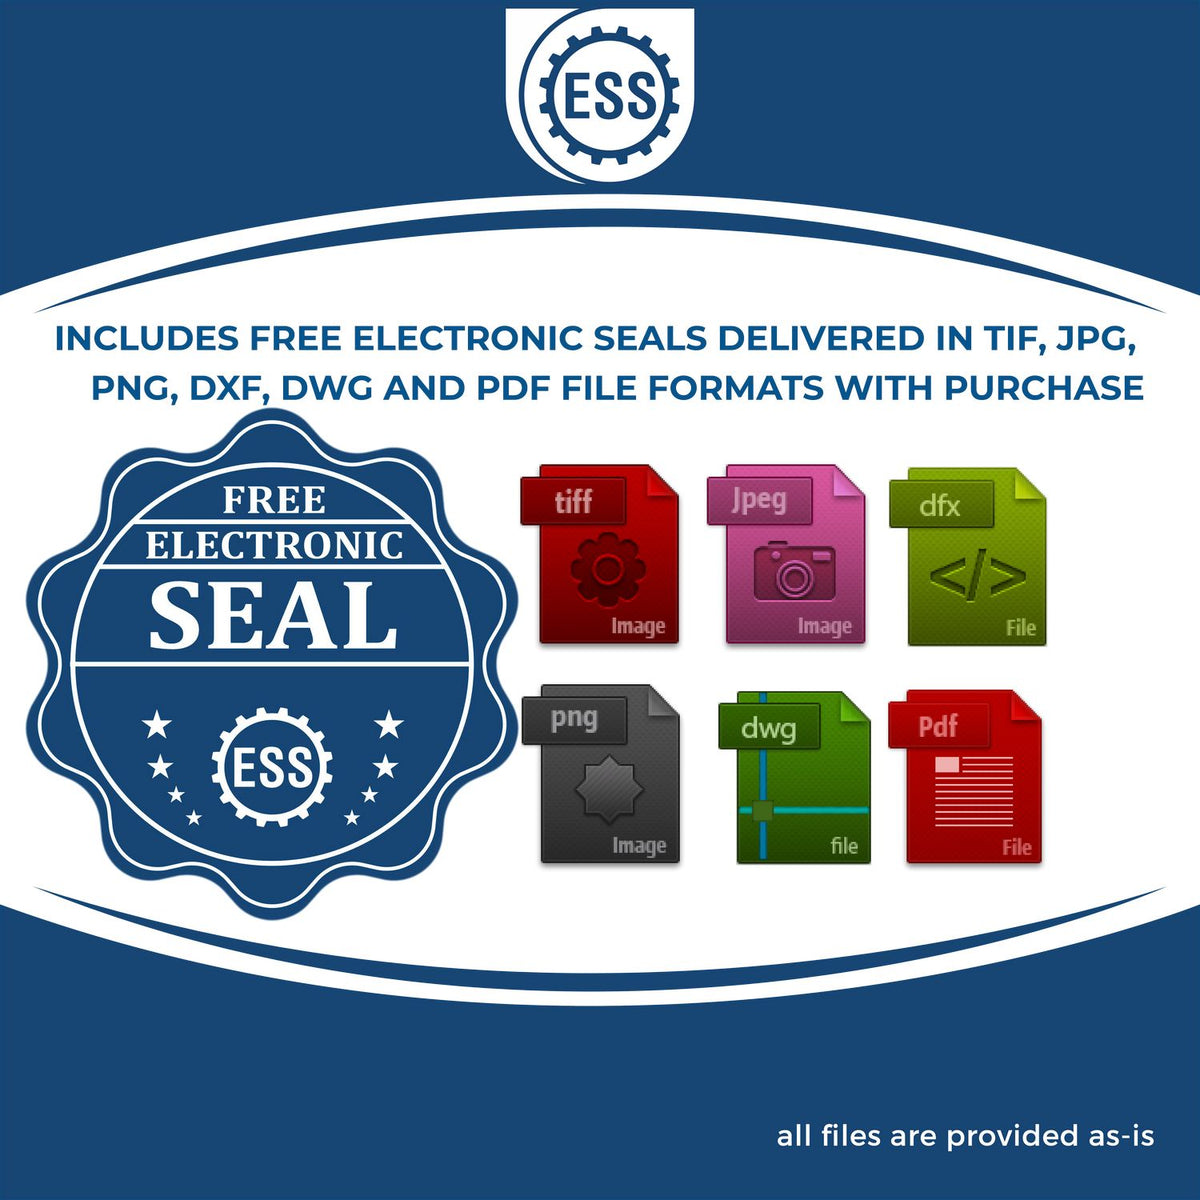 An infographic for the free electronic seal for the Hybrid Tennessee Land Surveyor Seal illustrating the different file type icons such as DXF, DWG, TIF, JPG and PNG.